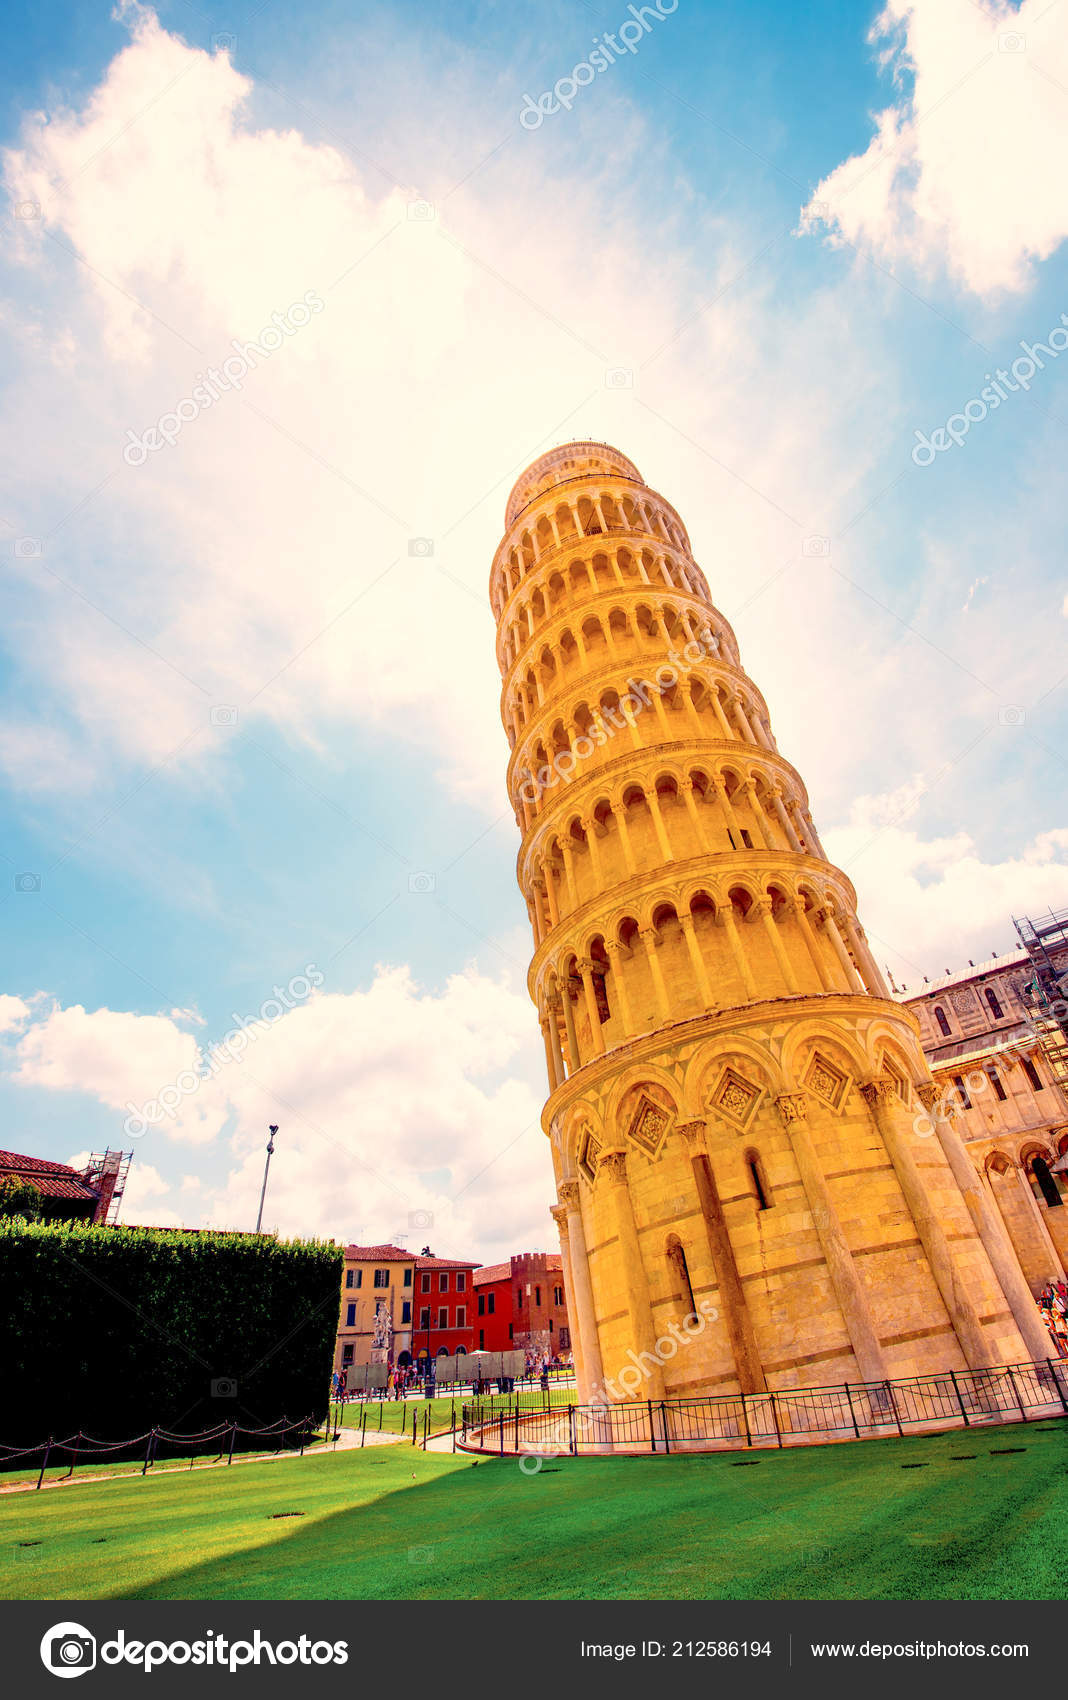 Amazing Landscape Famous Leaning Tower Pisa Italy Europe - Piazza Dei Miracoli , HD Wallpaper & Backgrounds